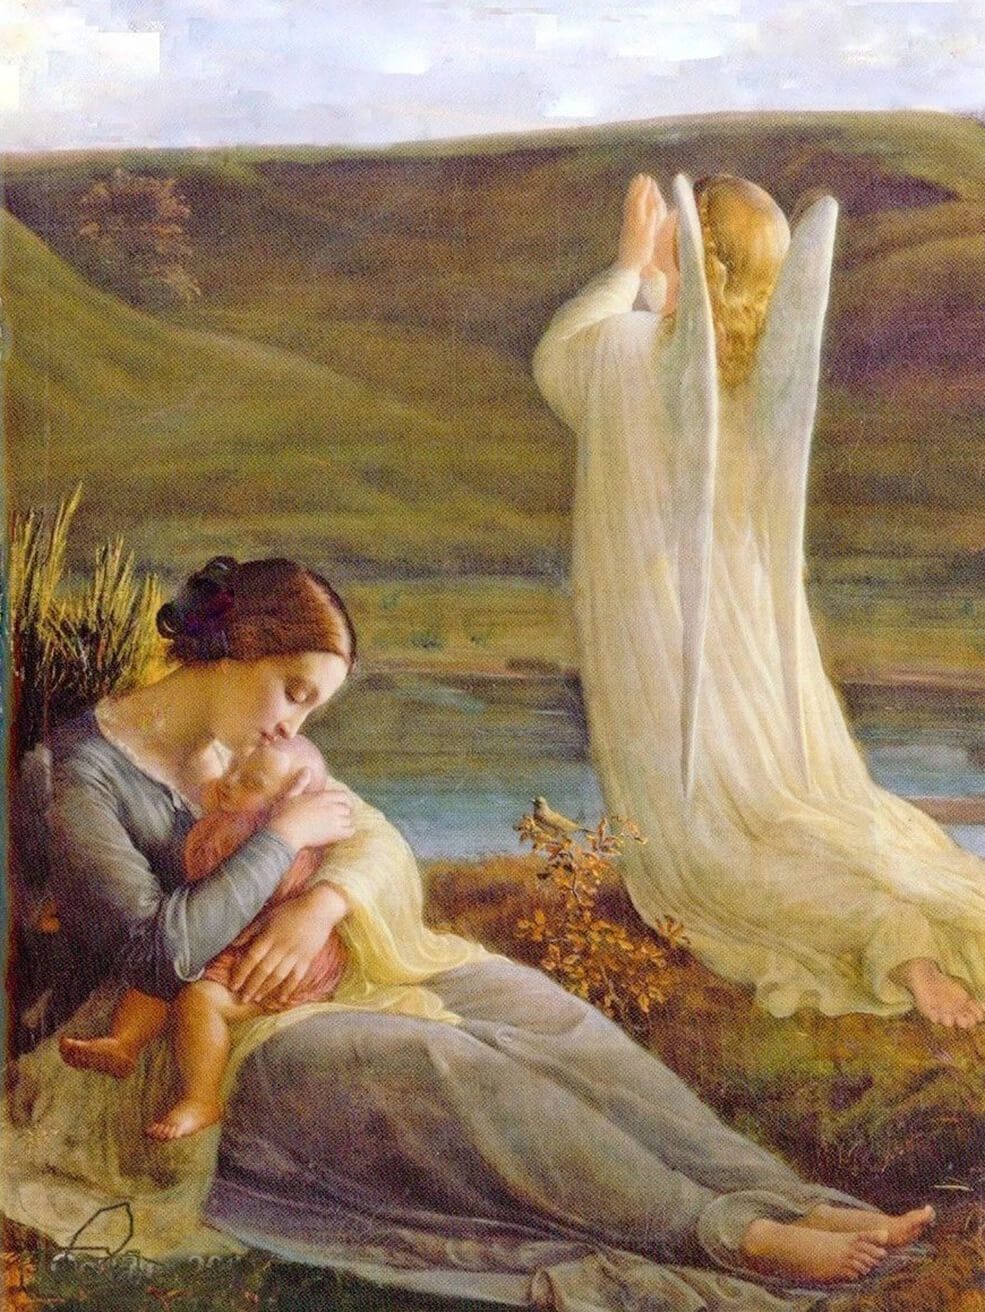 A painting of a woman and child in the grass.